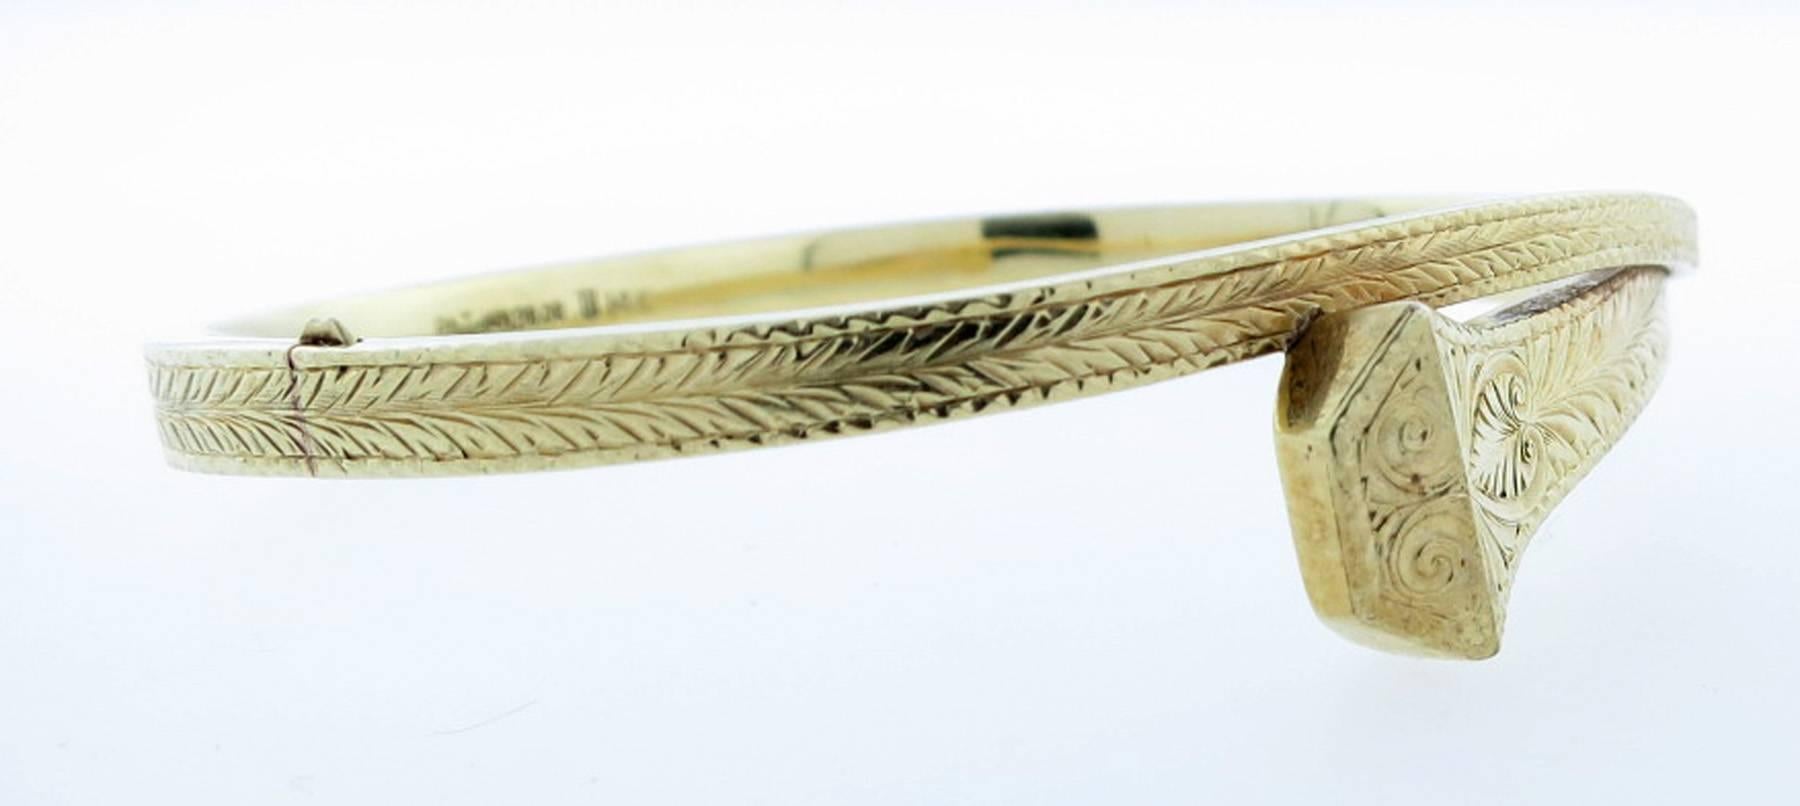 14kt. yellow gold bangle bracelet in a wrap around nail design. The bangle is hand engraved with a slide safety. The bangle will fit most wrists. Circa 1908 made by L. Fritschze & Company. 